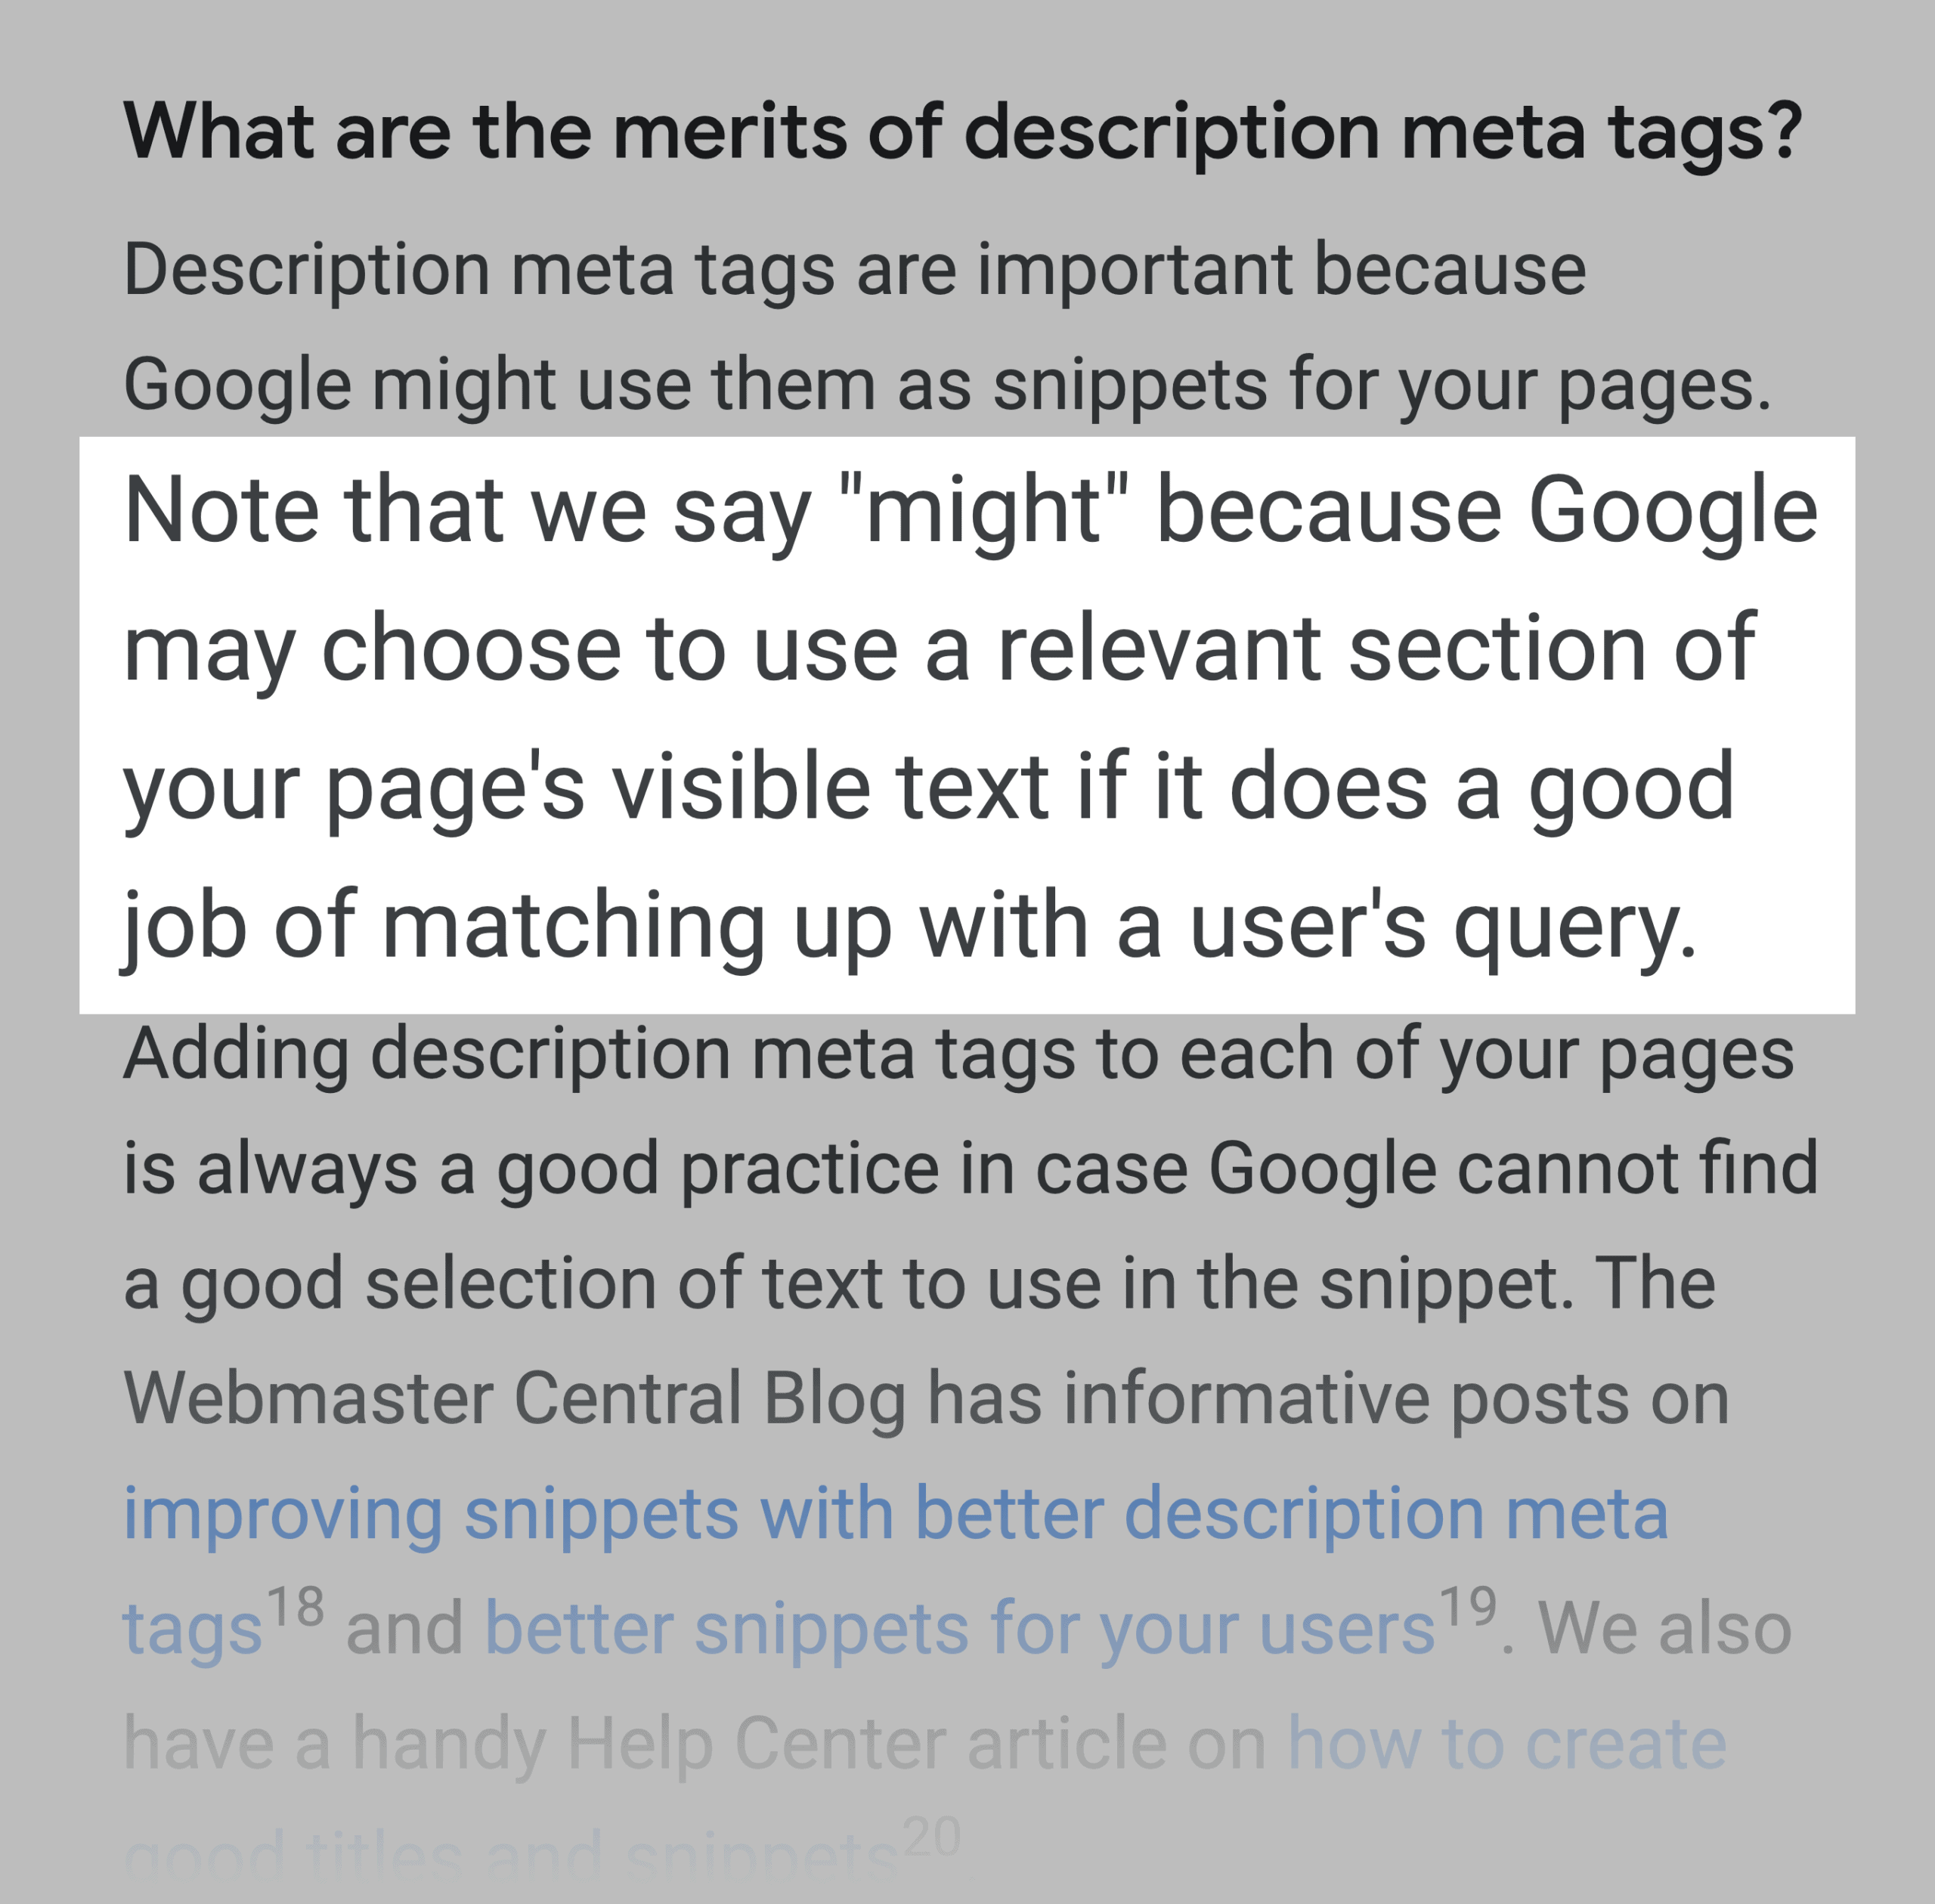 Google Will Often Replace Meta Description With Content From Page